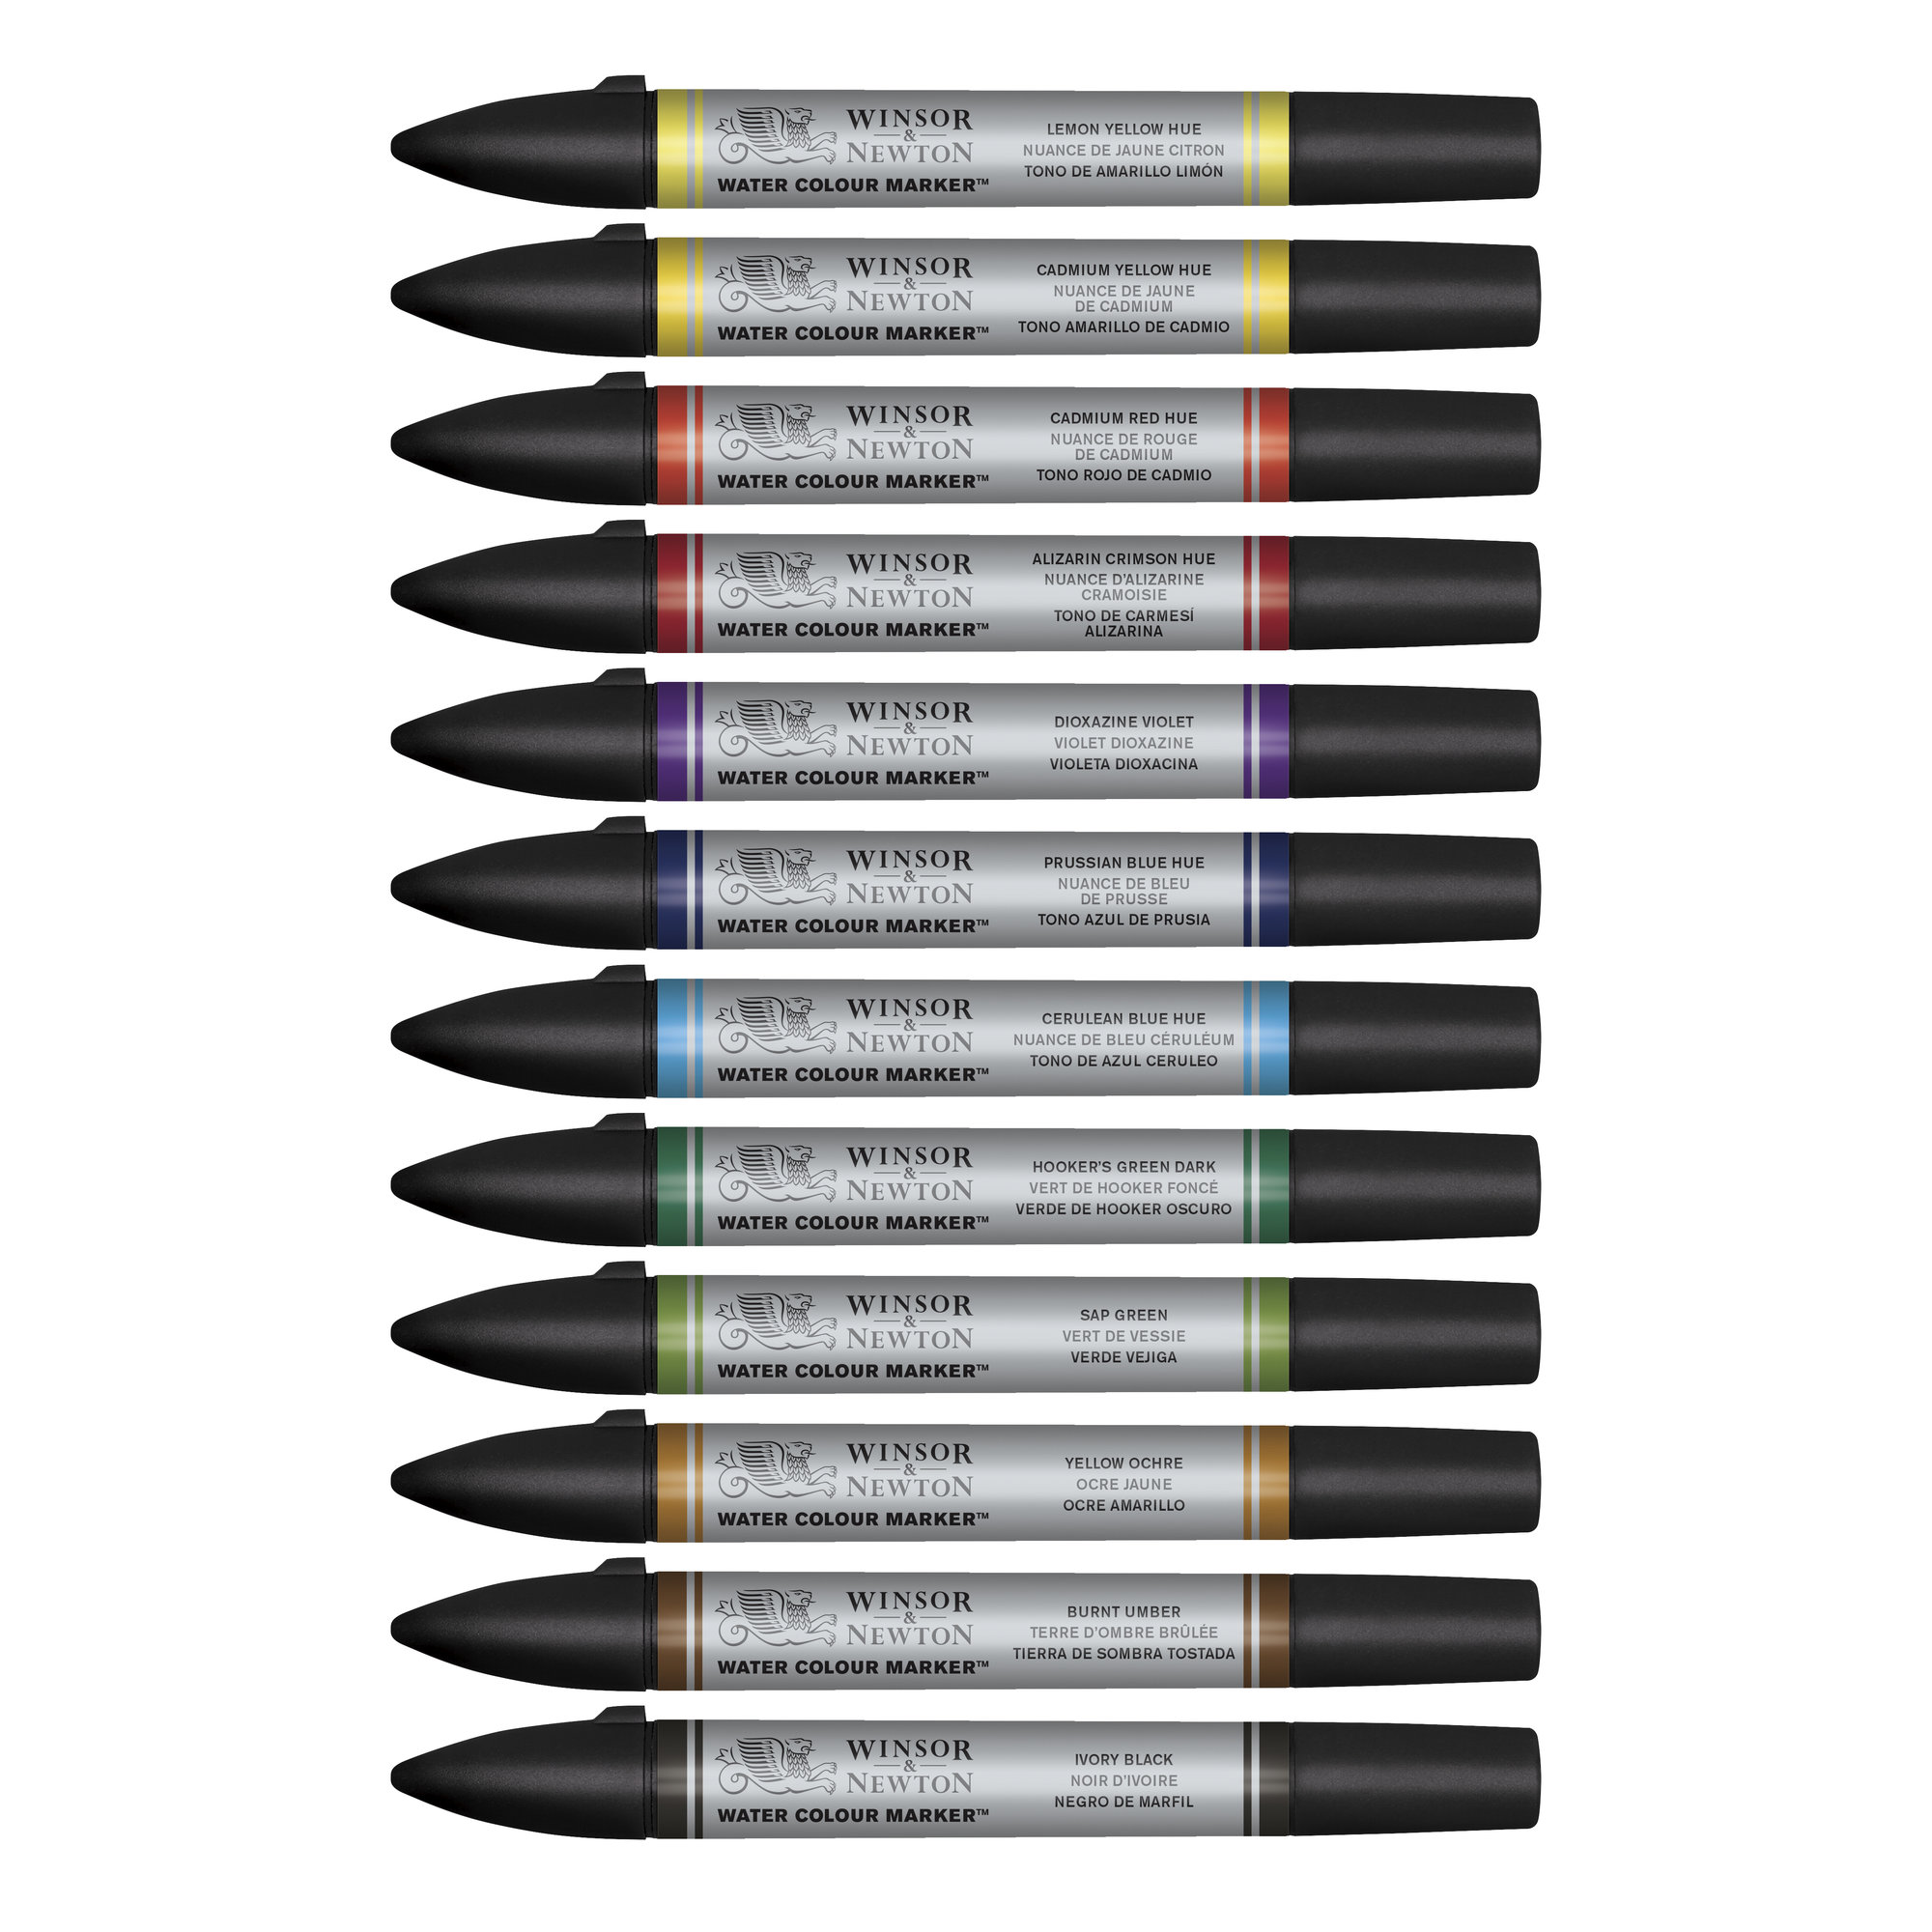 Winsor and Newton Water Colour Markers : Set of 12